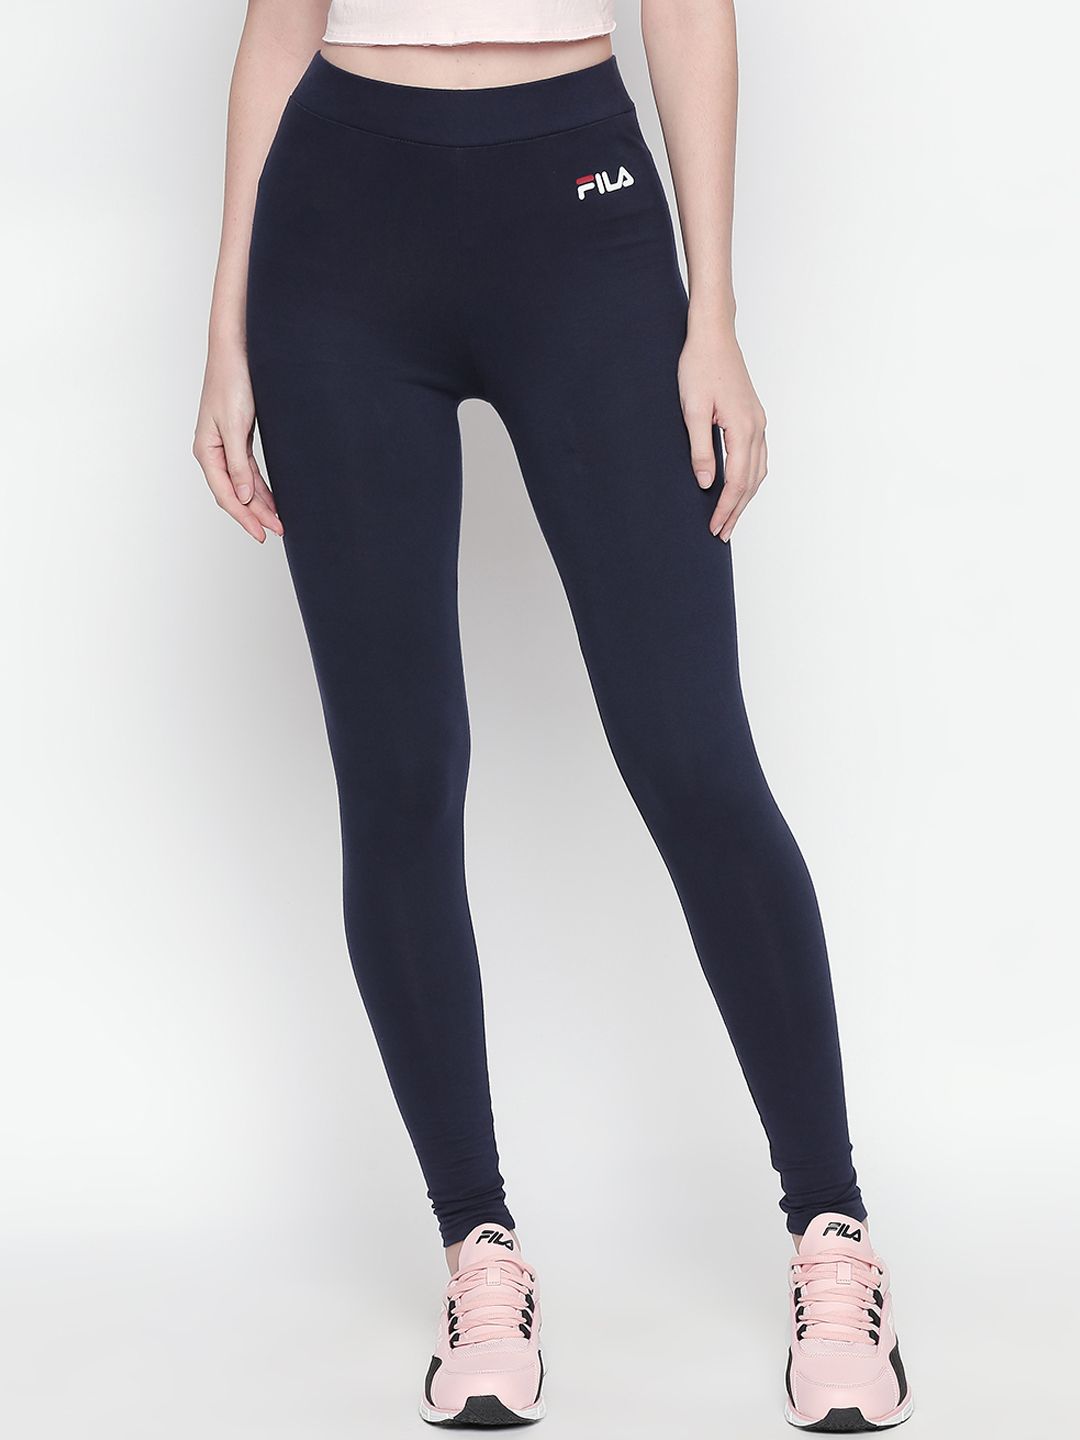 FILA Women Navy Blue Solid Tights Price in India